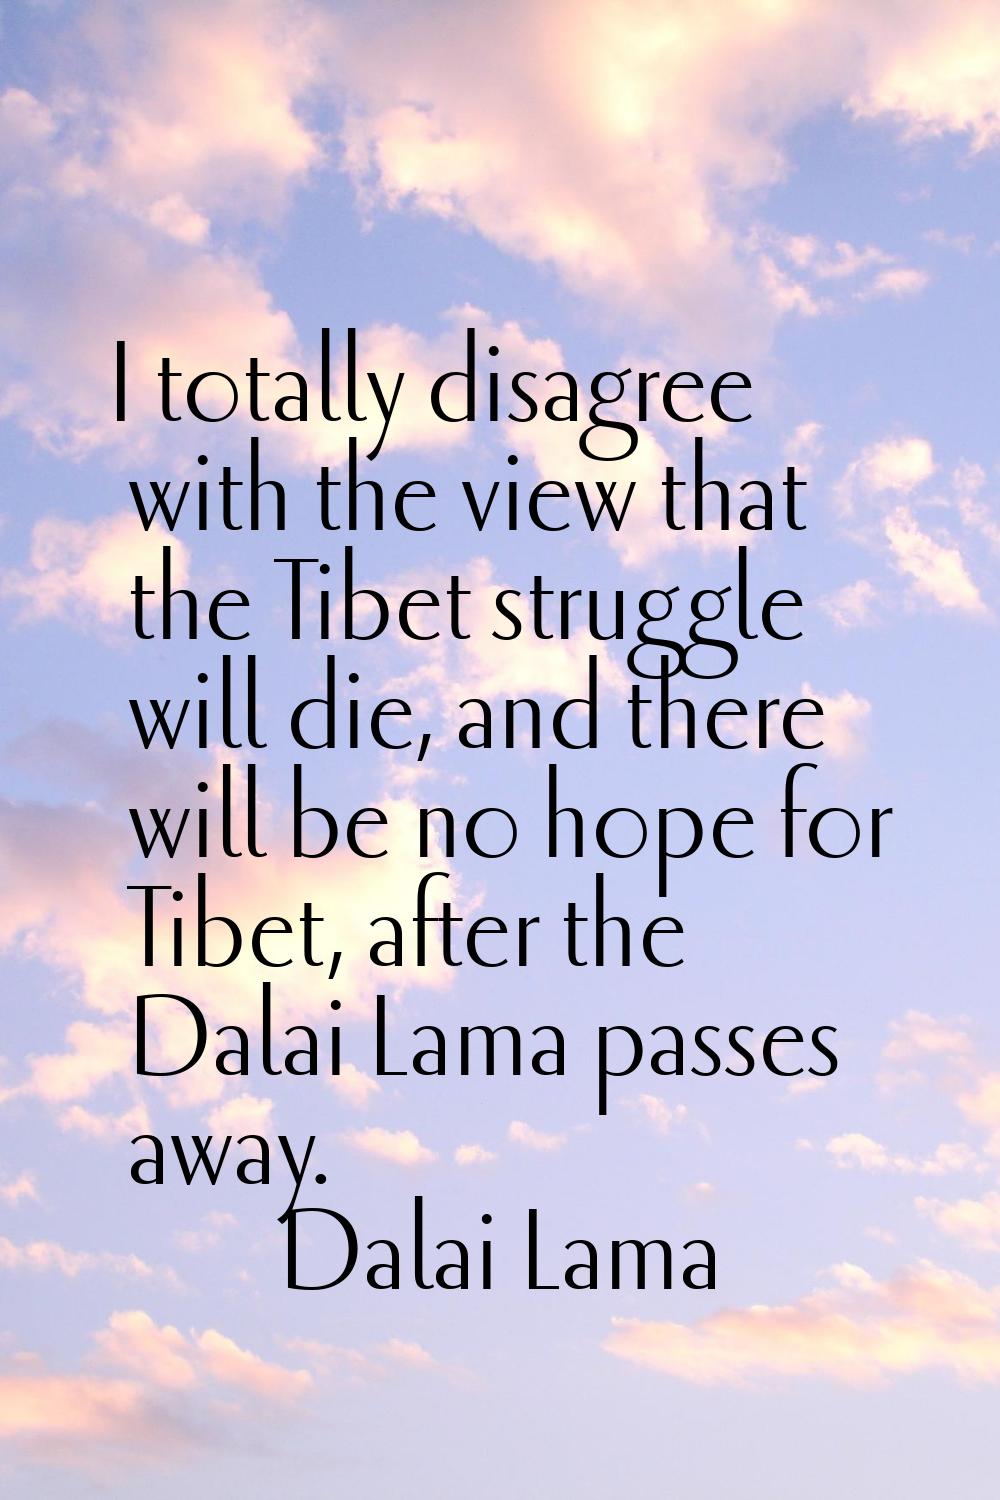 I totally disagree with the view that the Tibet struggle will die, and there will be no hope for Ti